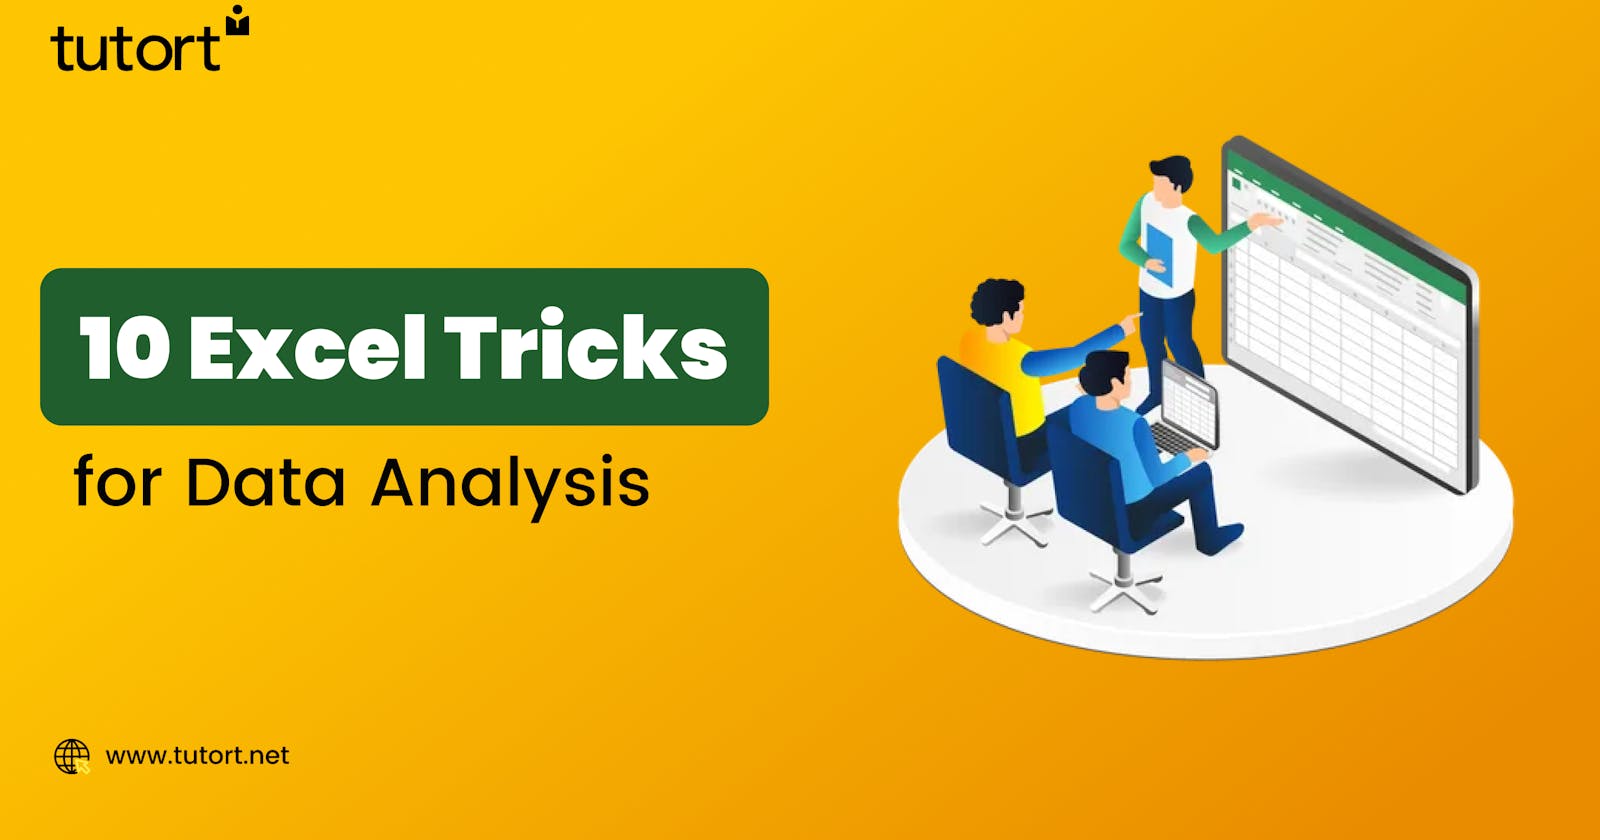 10 Simple Yet Powerful Excel Tricks for Data Analysis